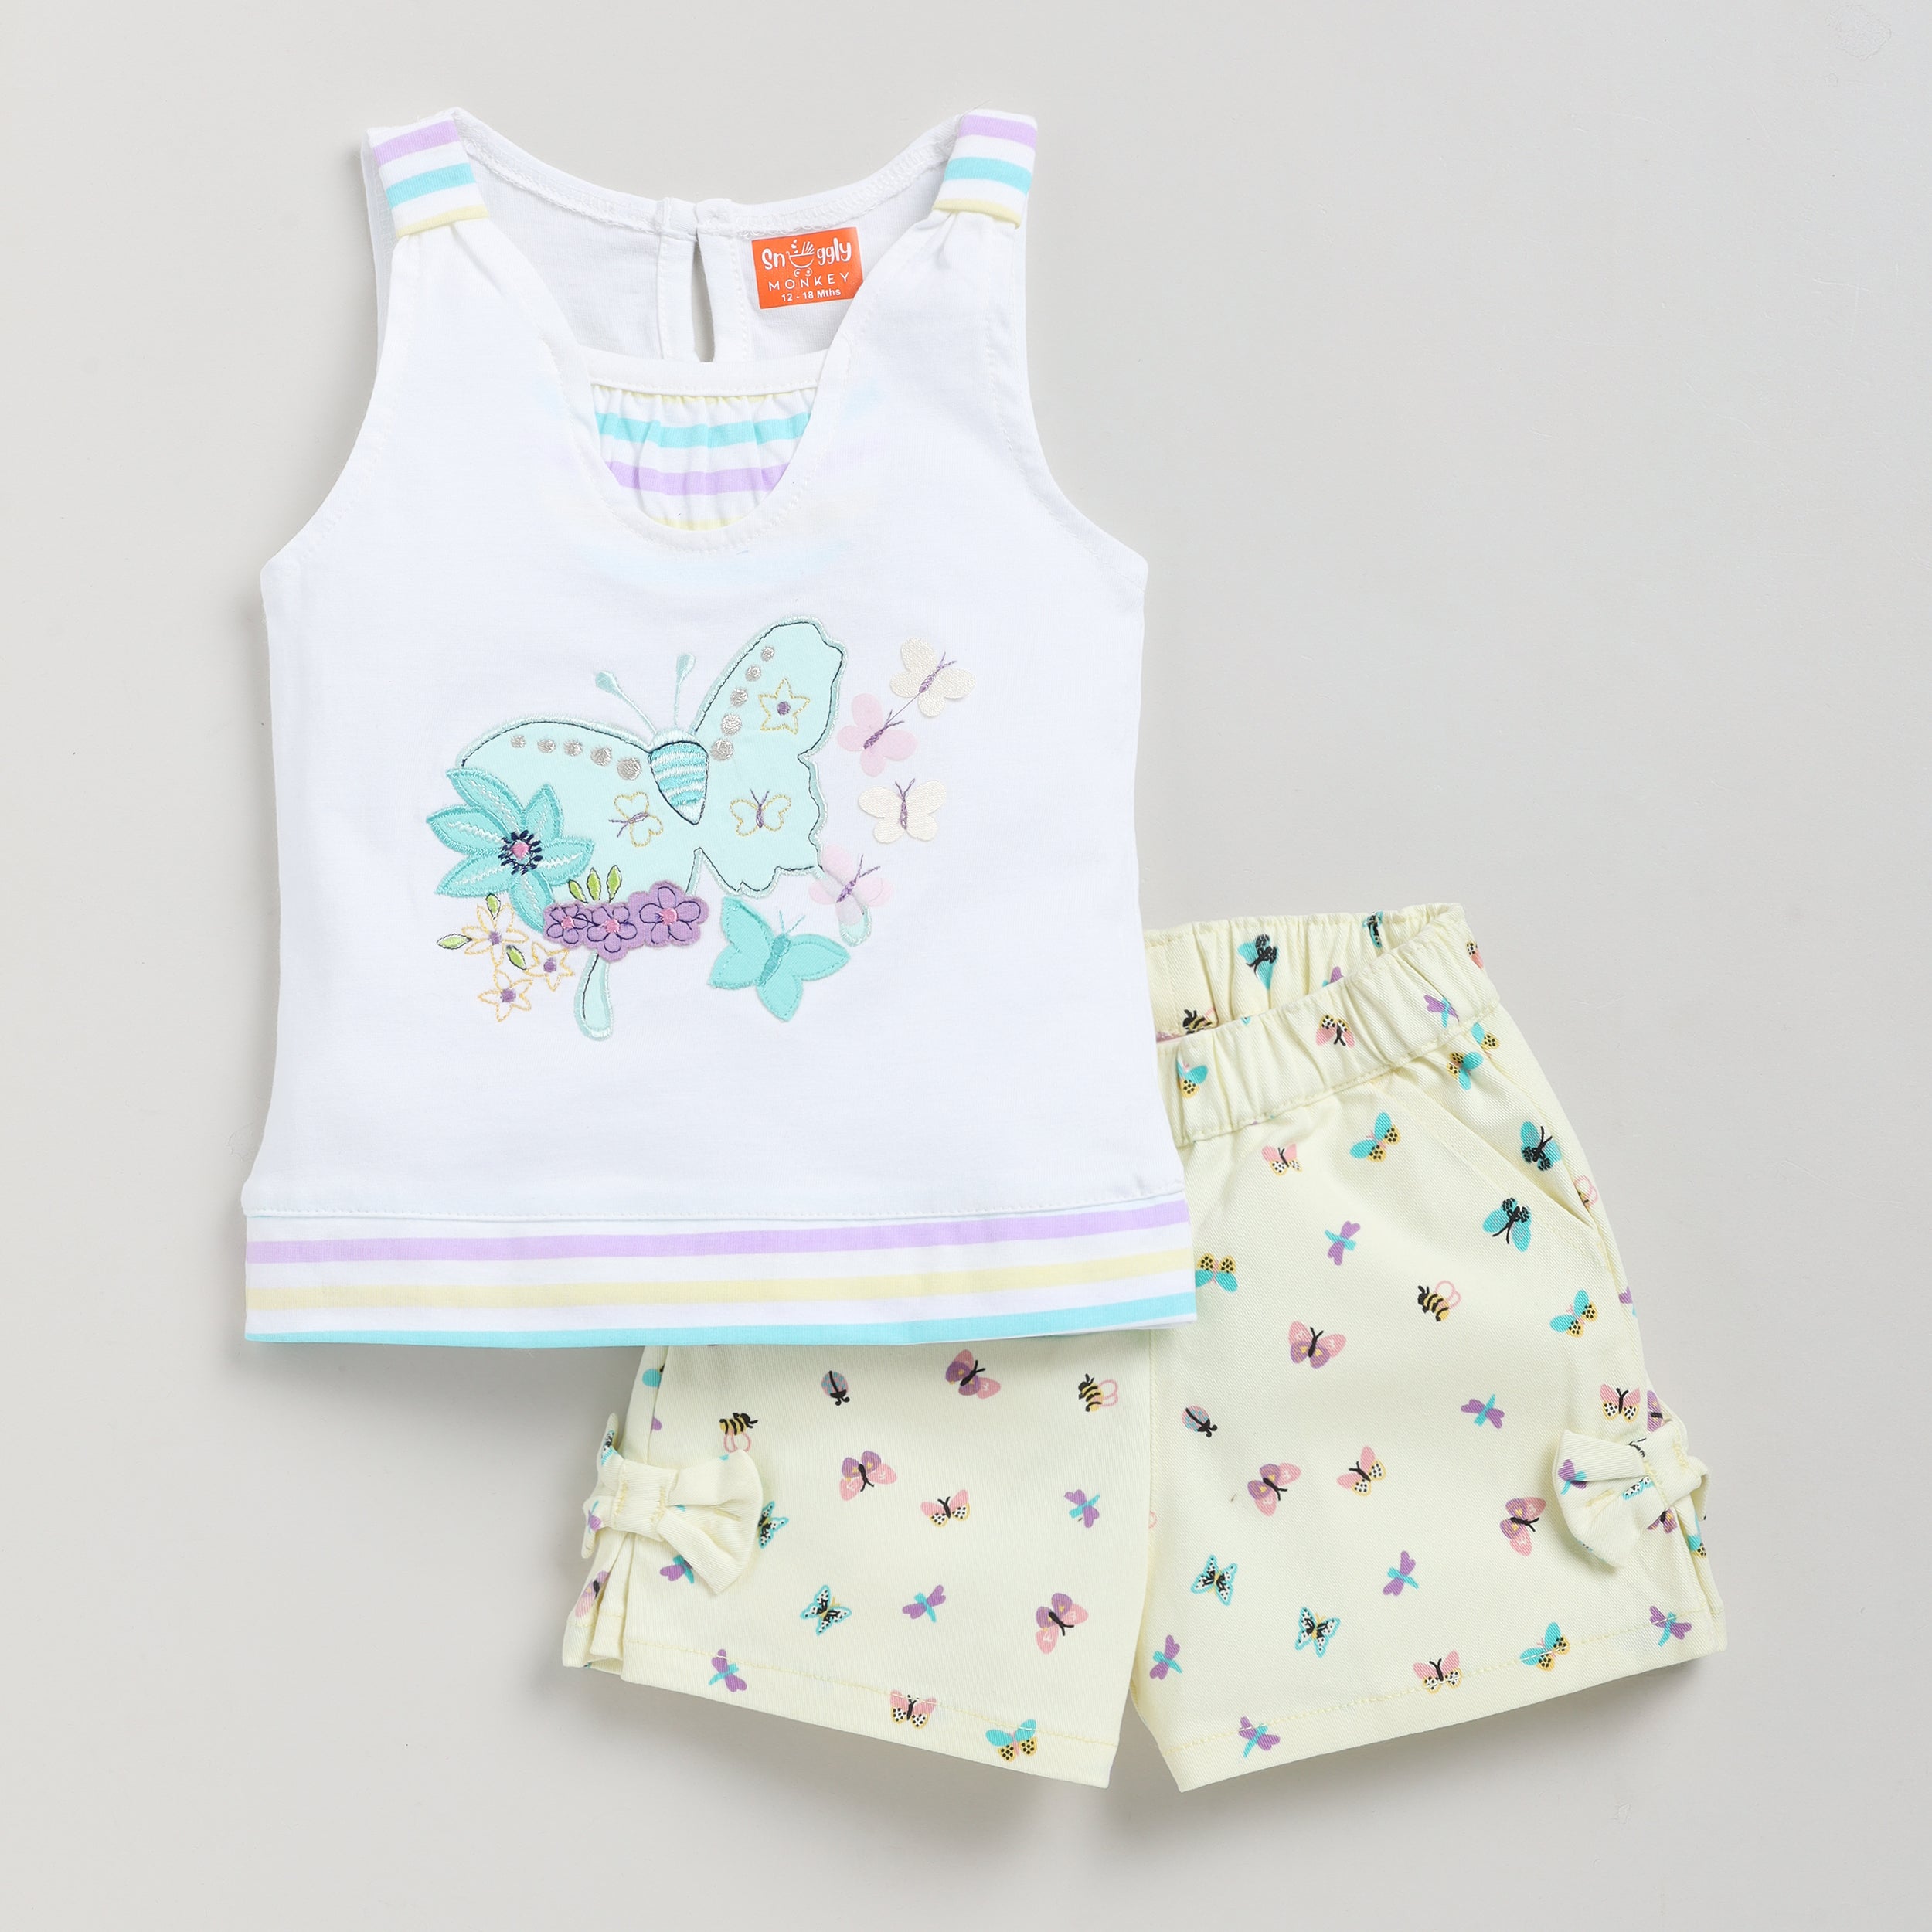 Snuggly Monkey Butterly Design Top with Shorts for Summer - Lemon